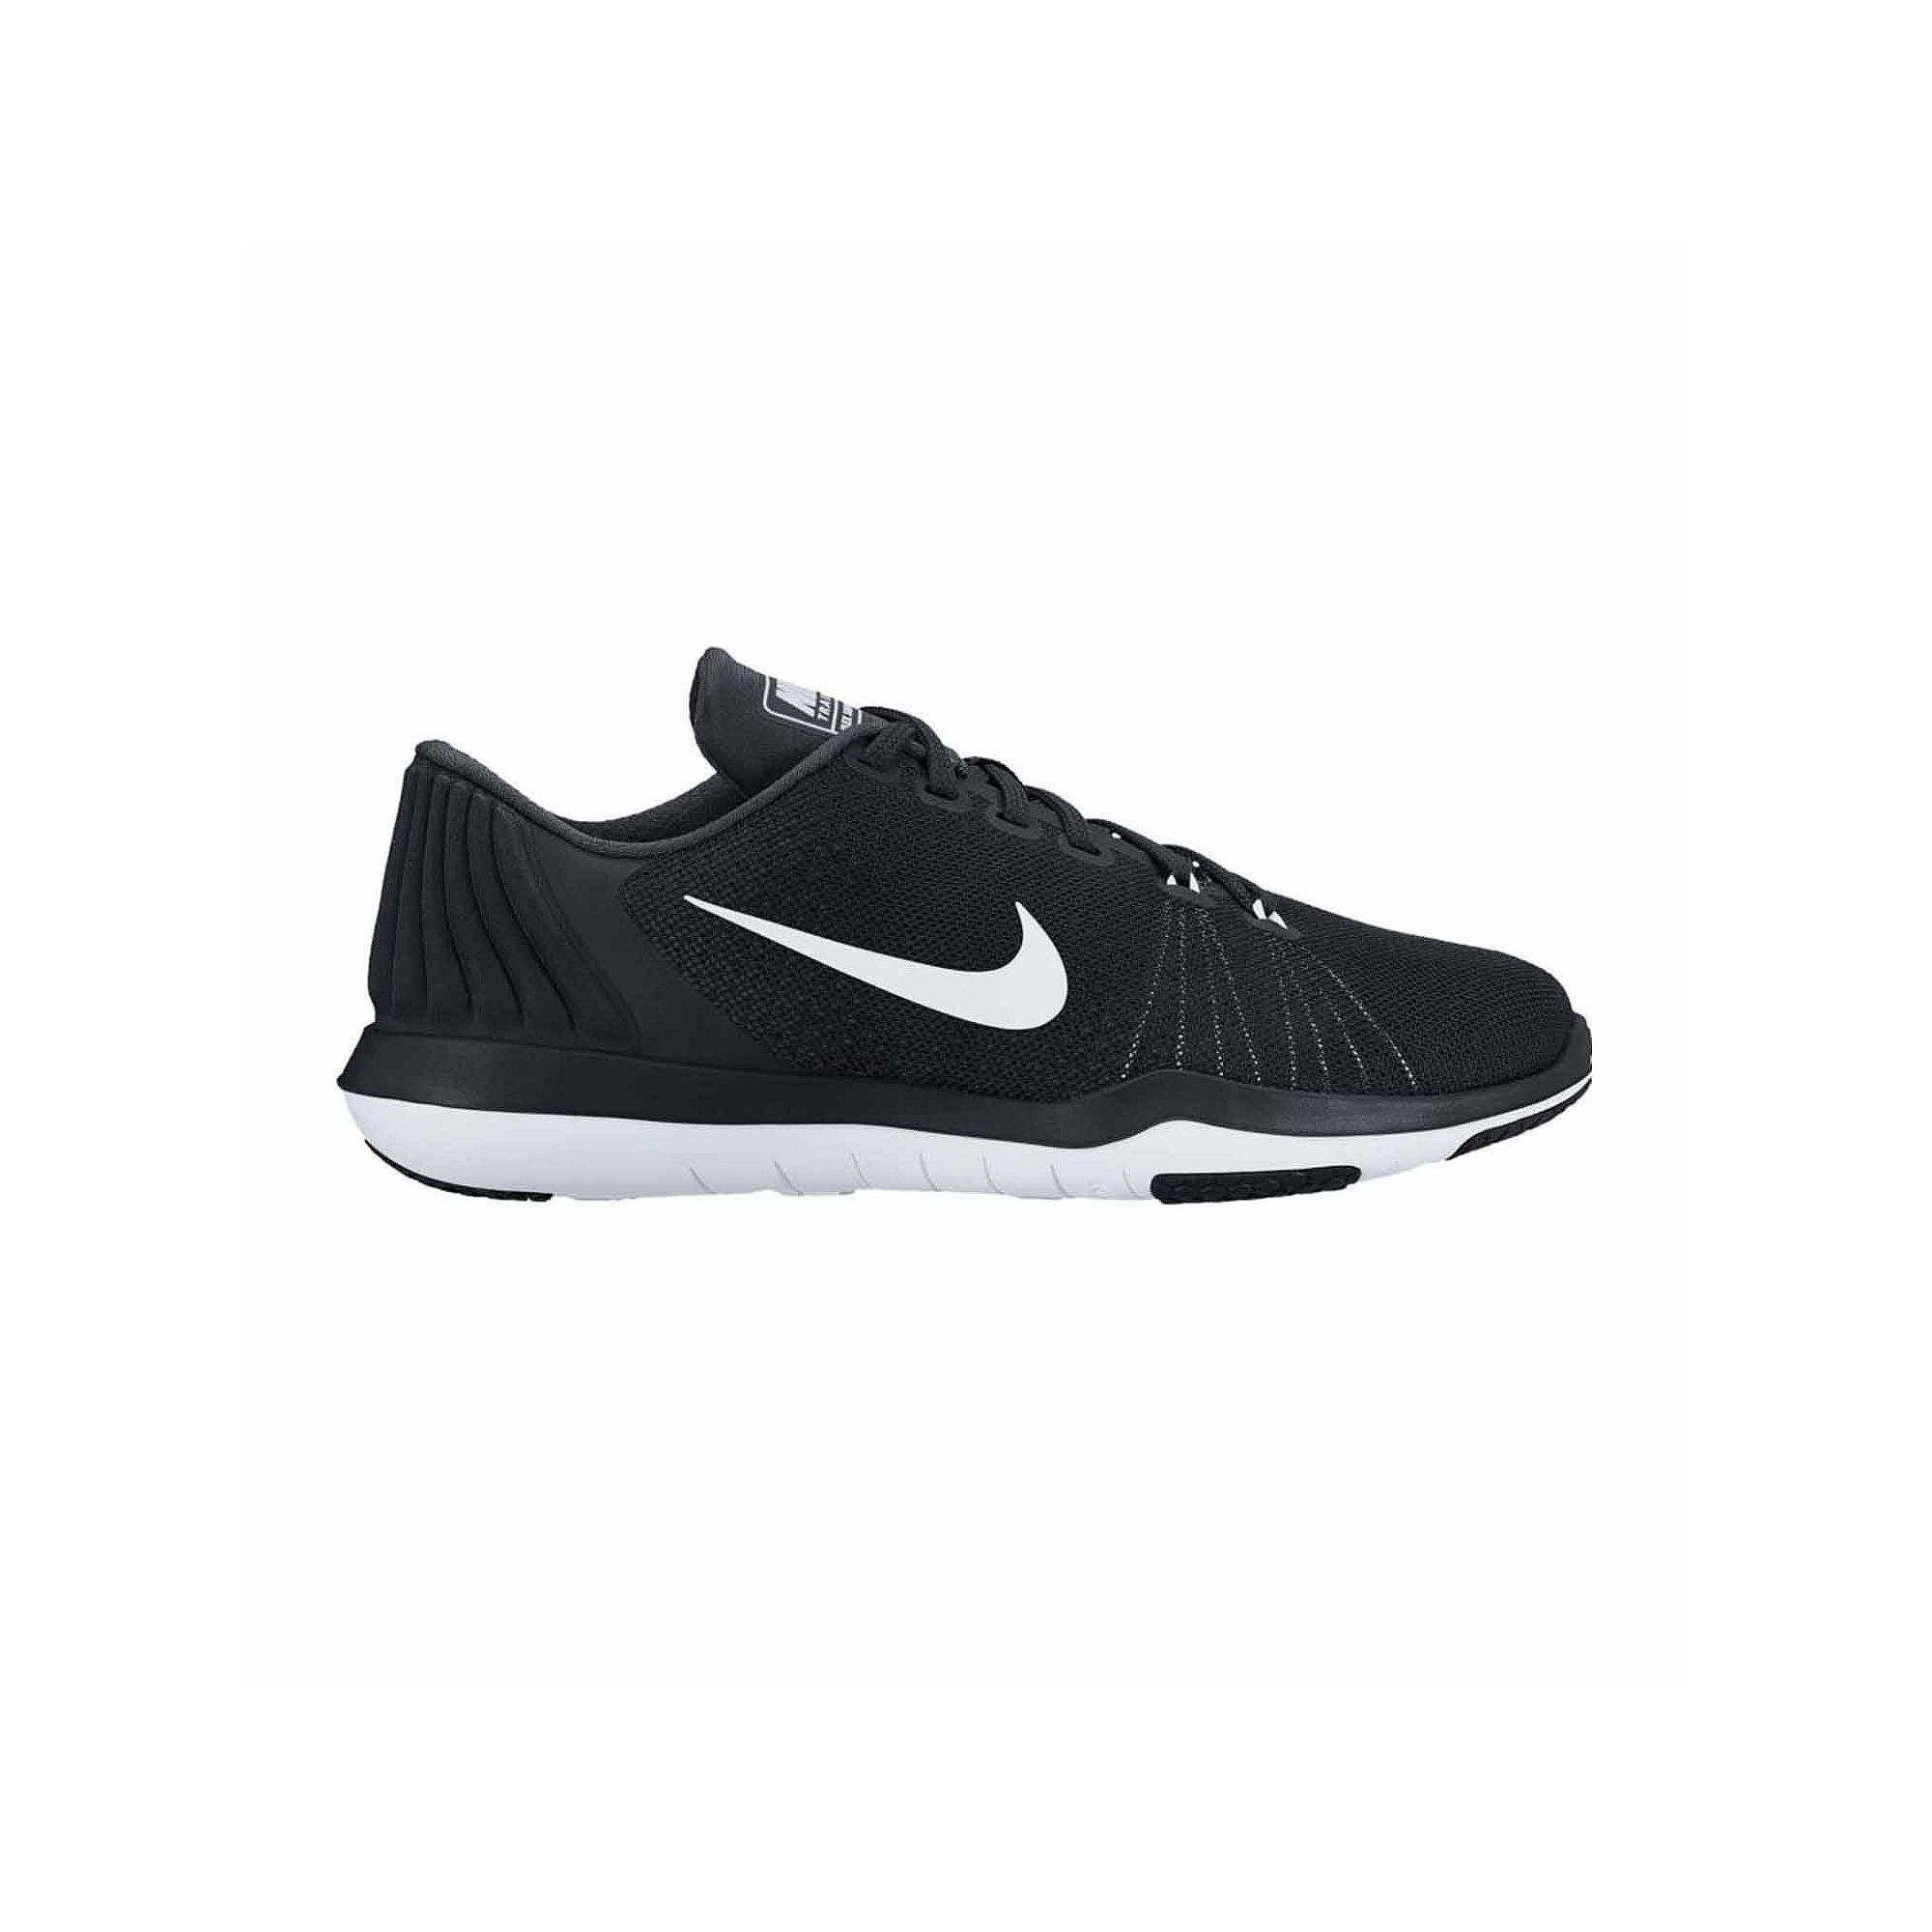 Nike Womens Training Shoes | JCPenney